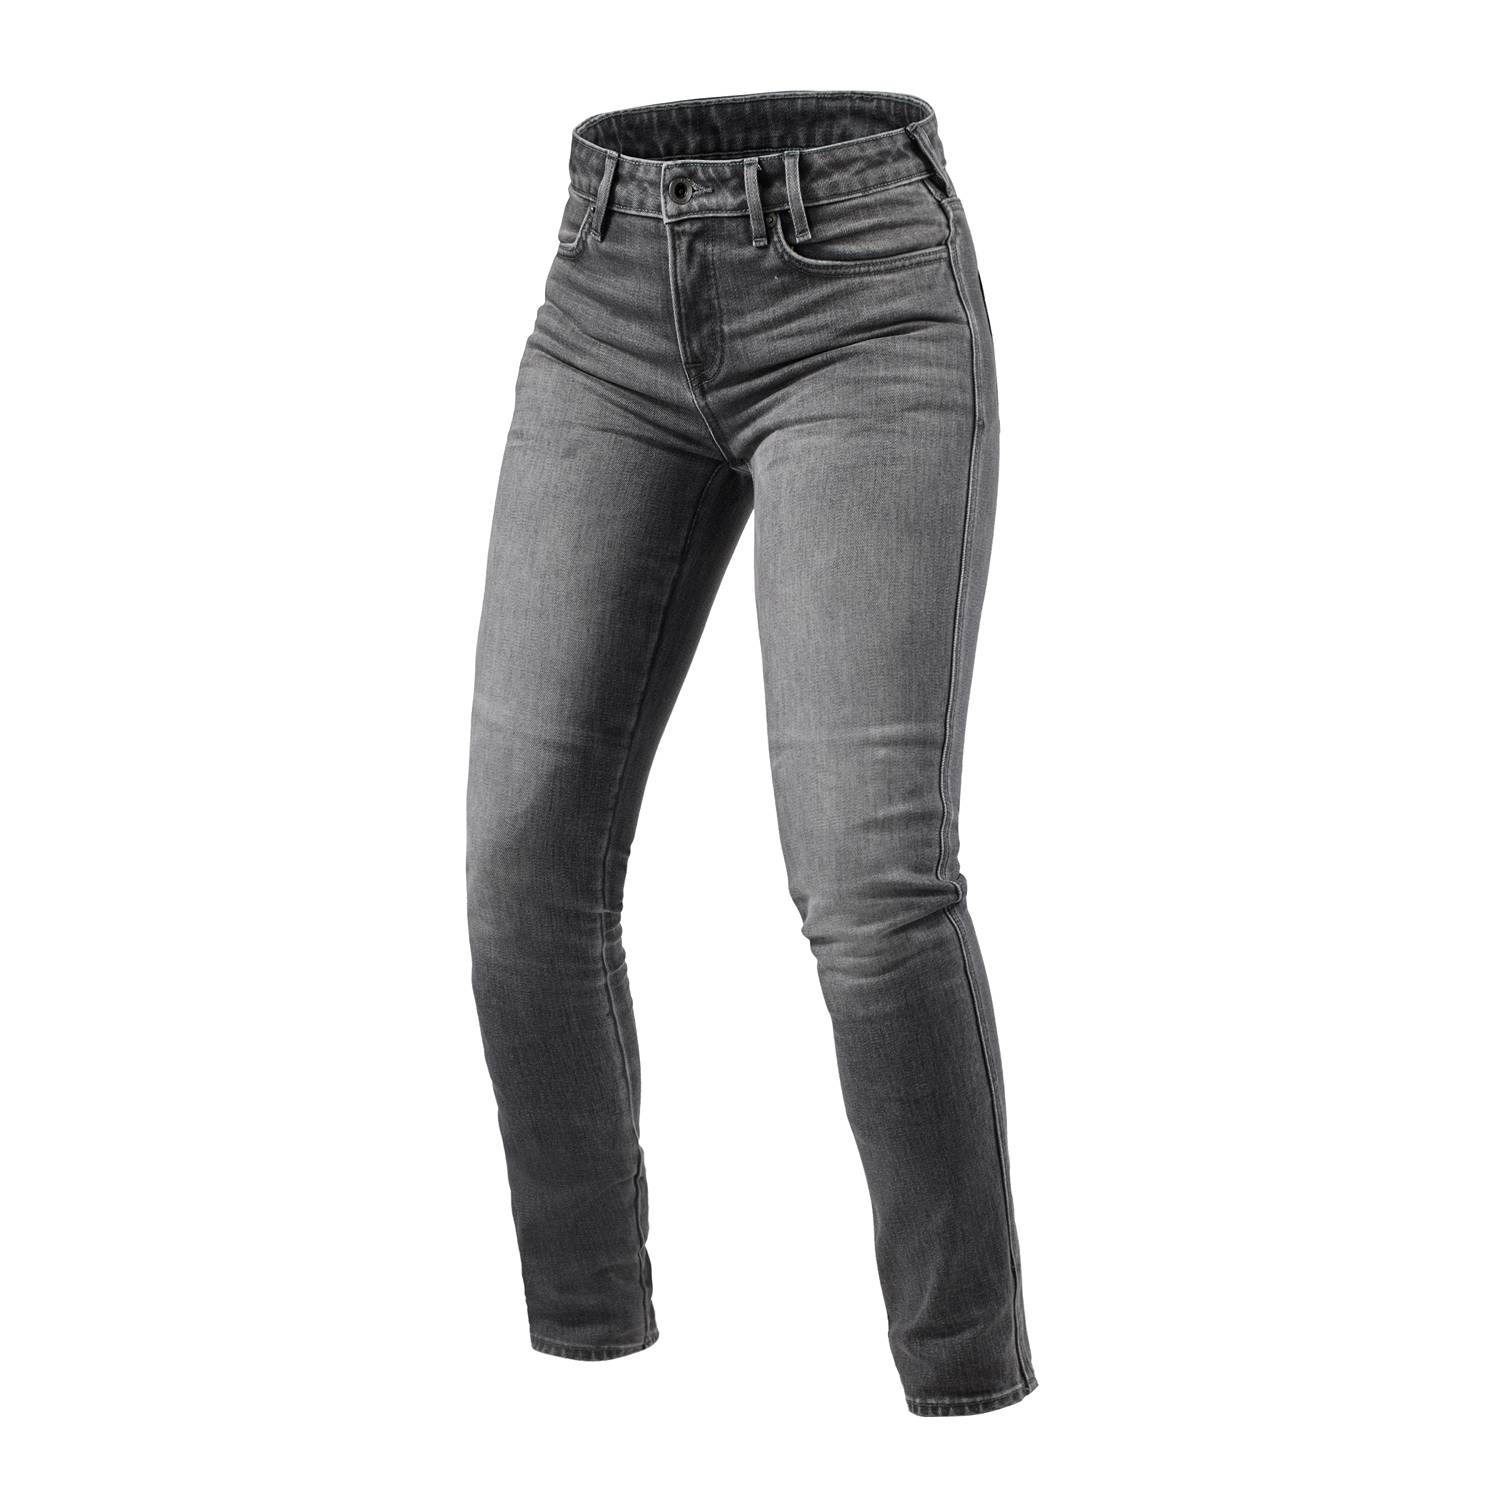 Image of REV'IT! Jeans Shelby 2 Ladies SK Medium Grey Stone L32 Taille L32/W24